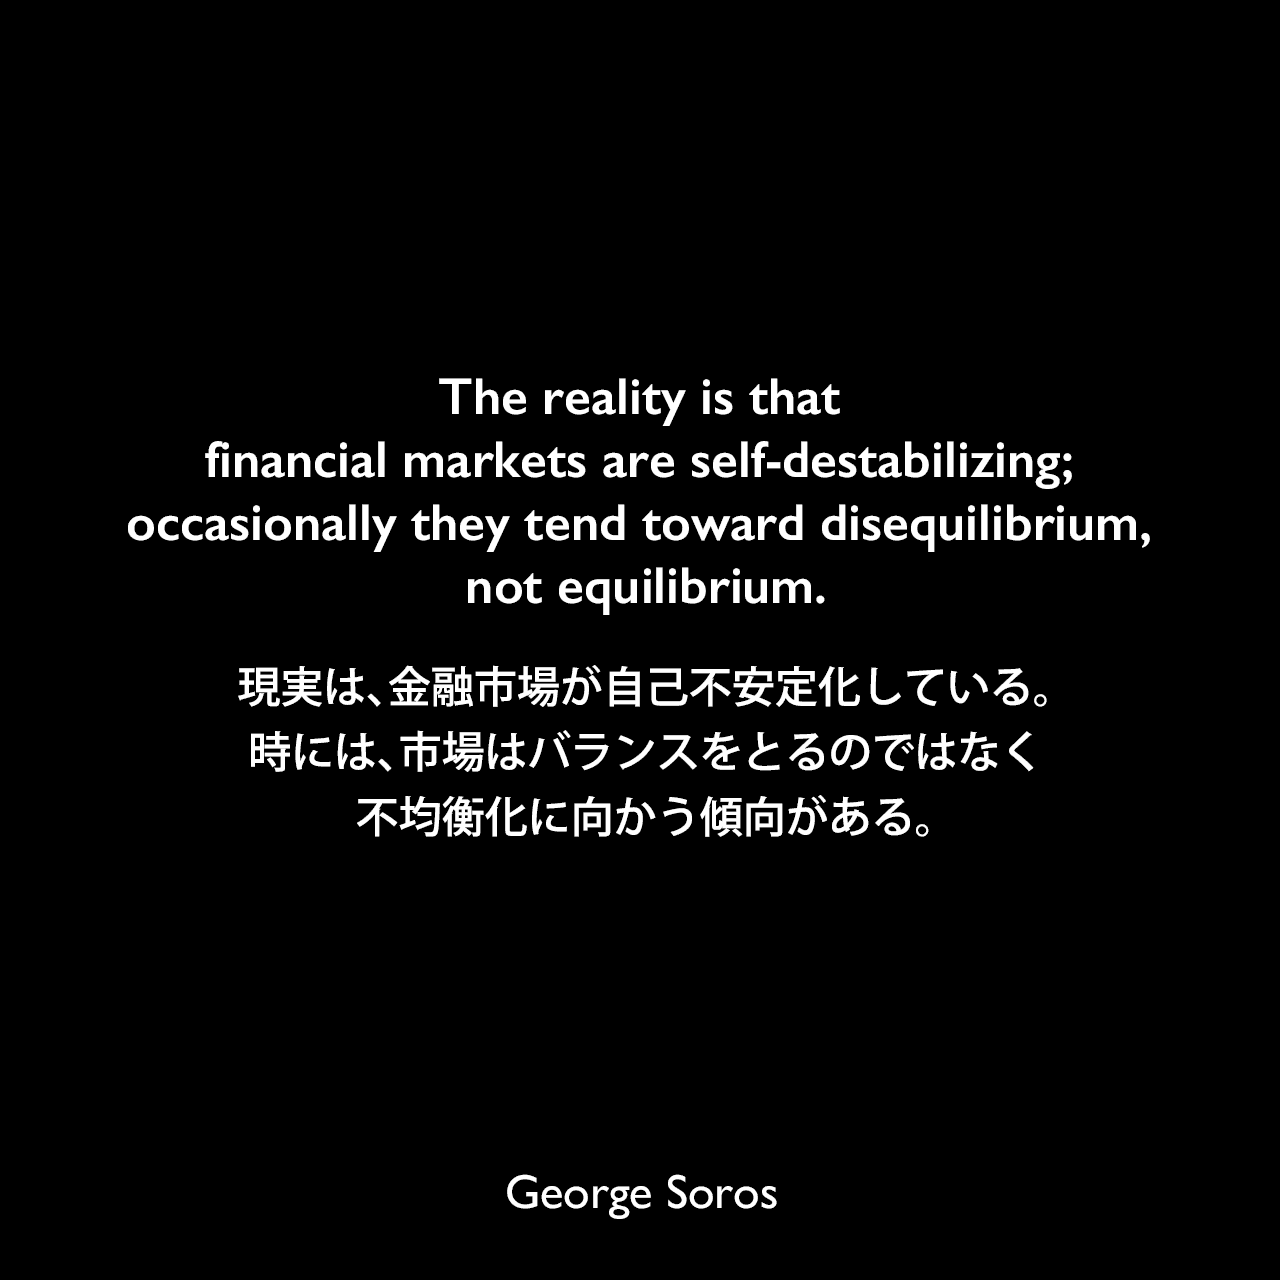 The reality is that financial markets are self-destabilizing; occasionally they tend toward disequilibrium, not equilibrium.現実は、金融市場が自己不安定化している。時には、市場はバランスをとるのではなく不均衡化に向かう傾向がある。George Soros